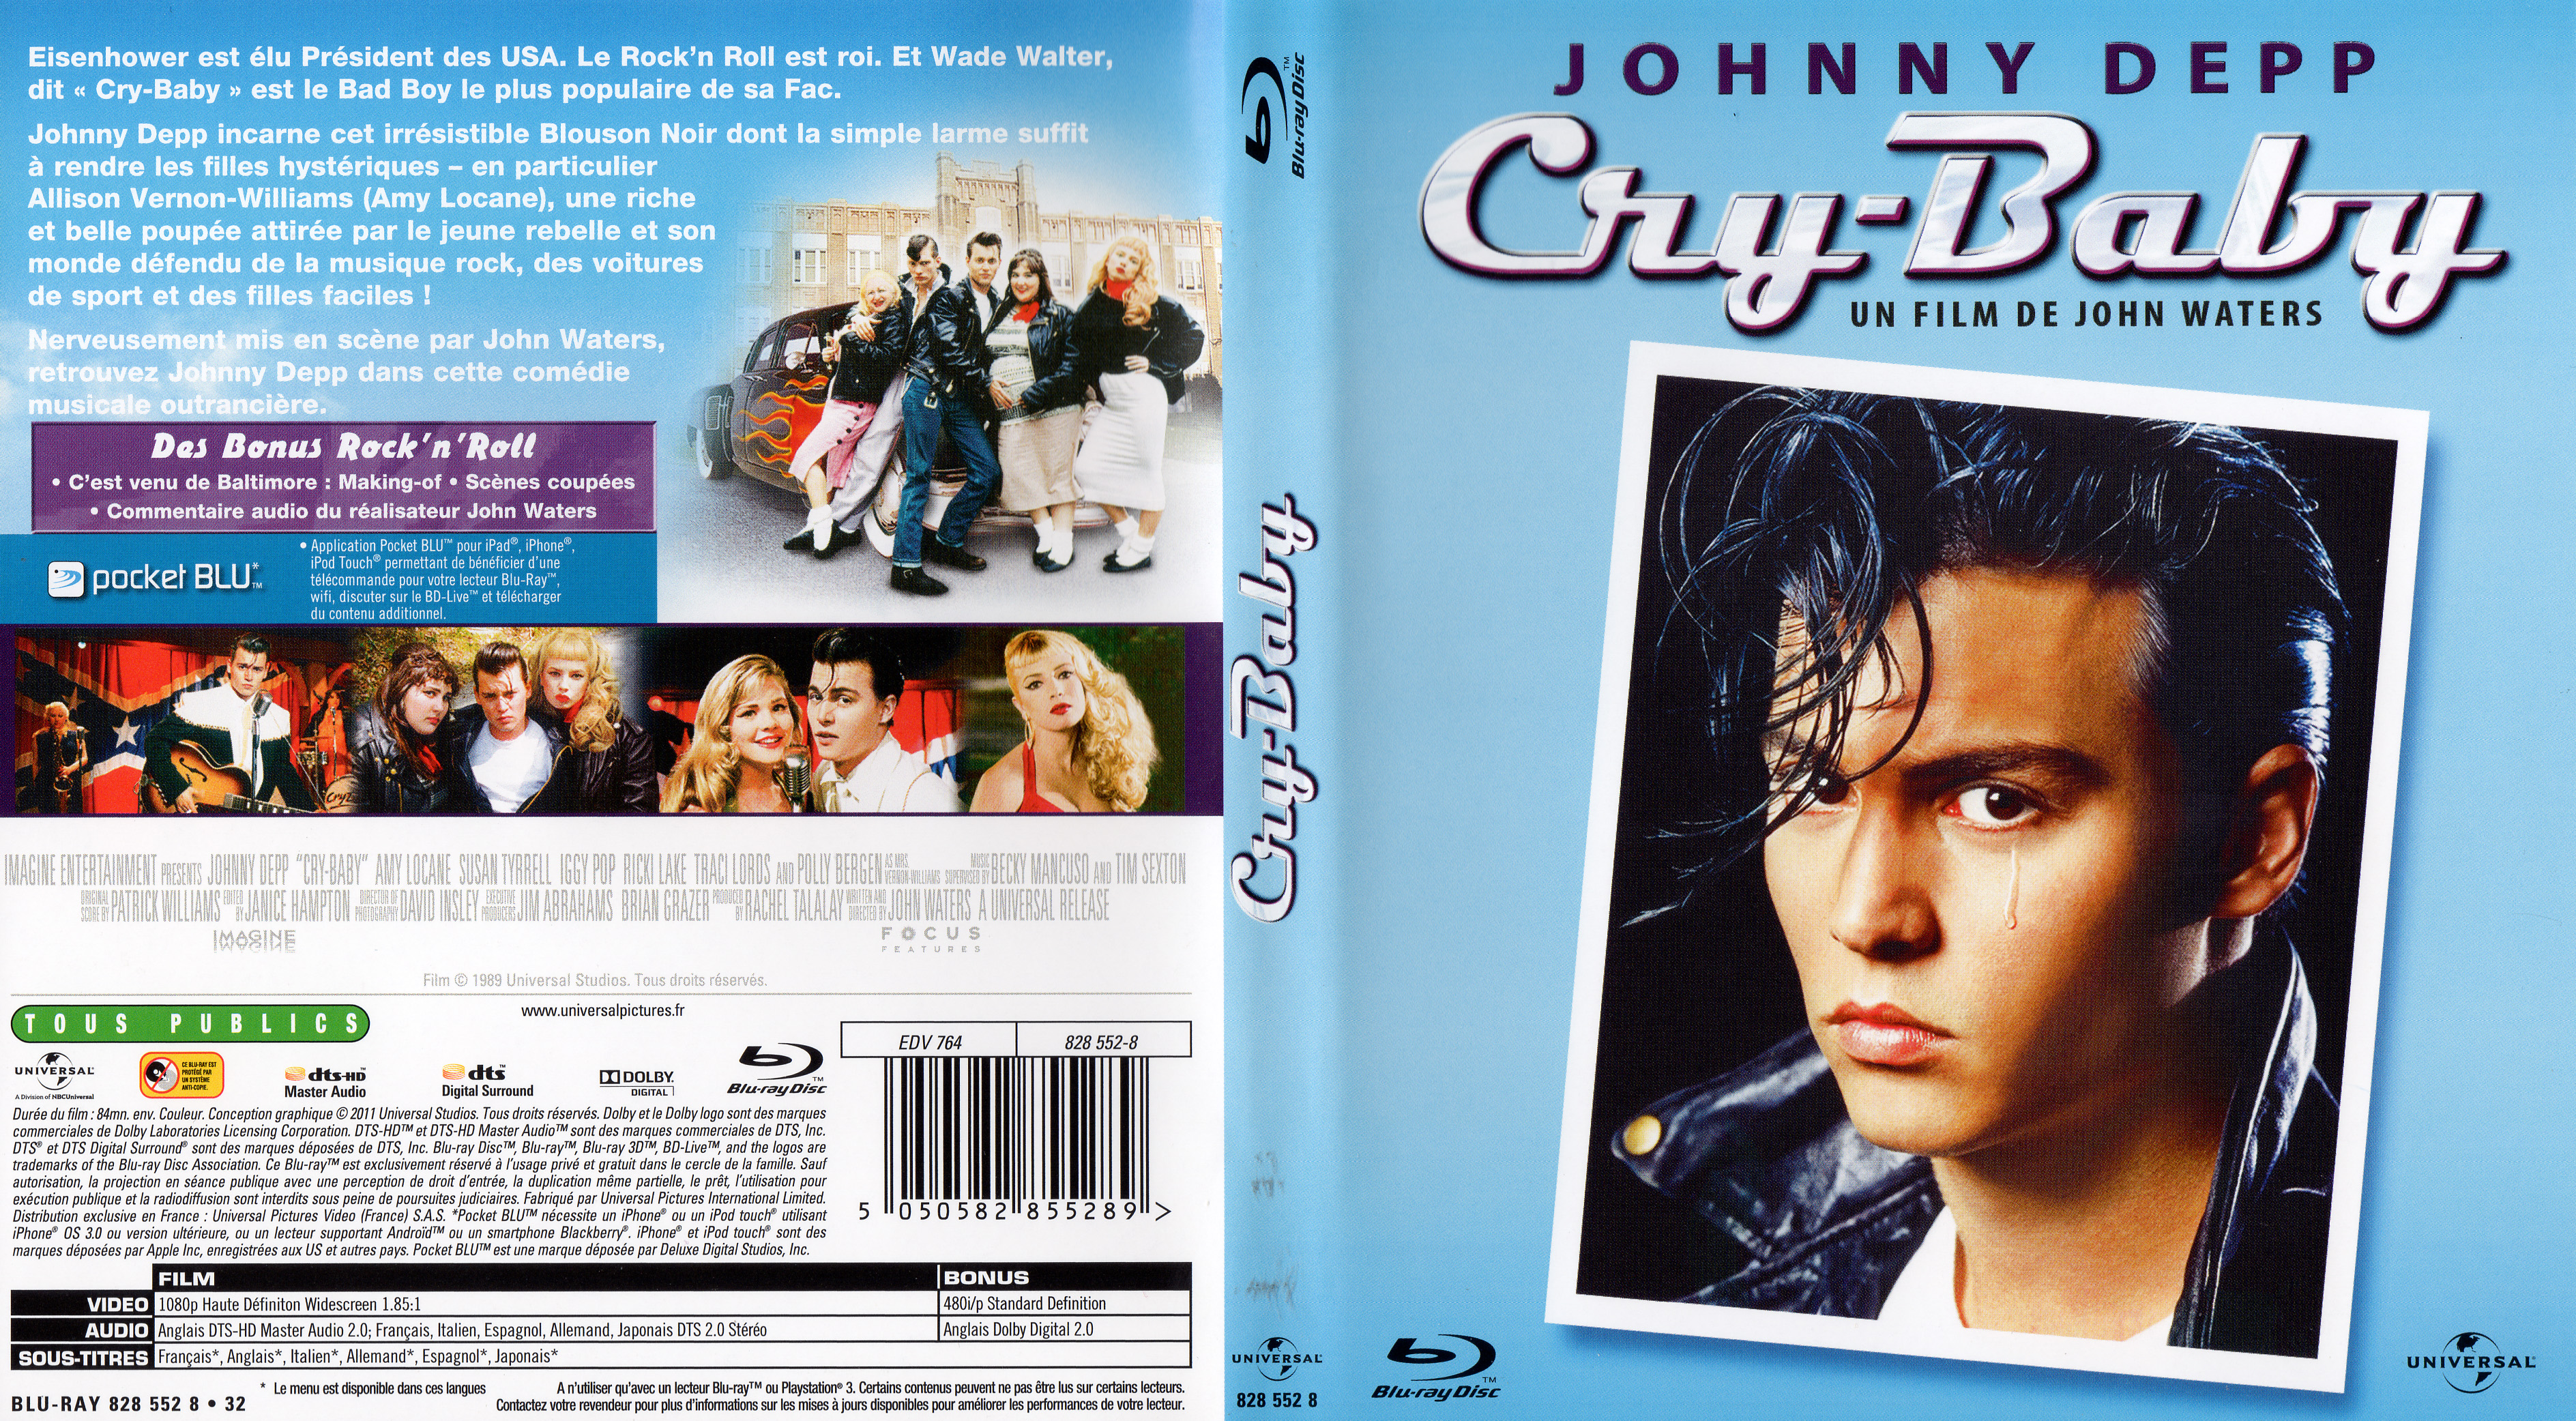 Jaquette DVD Cry Baby (BLU-RAY)